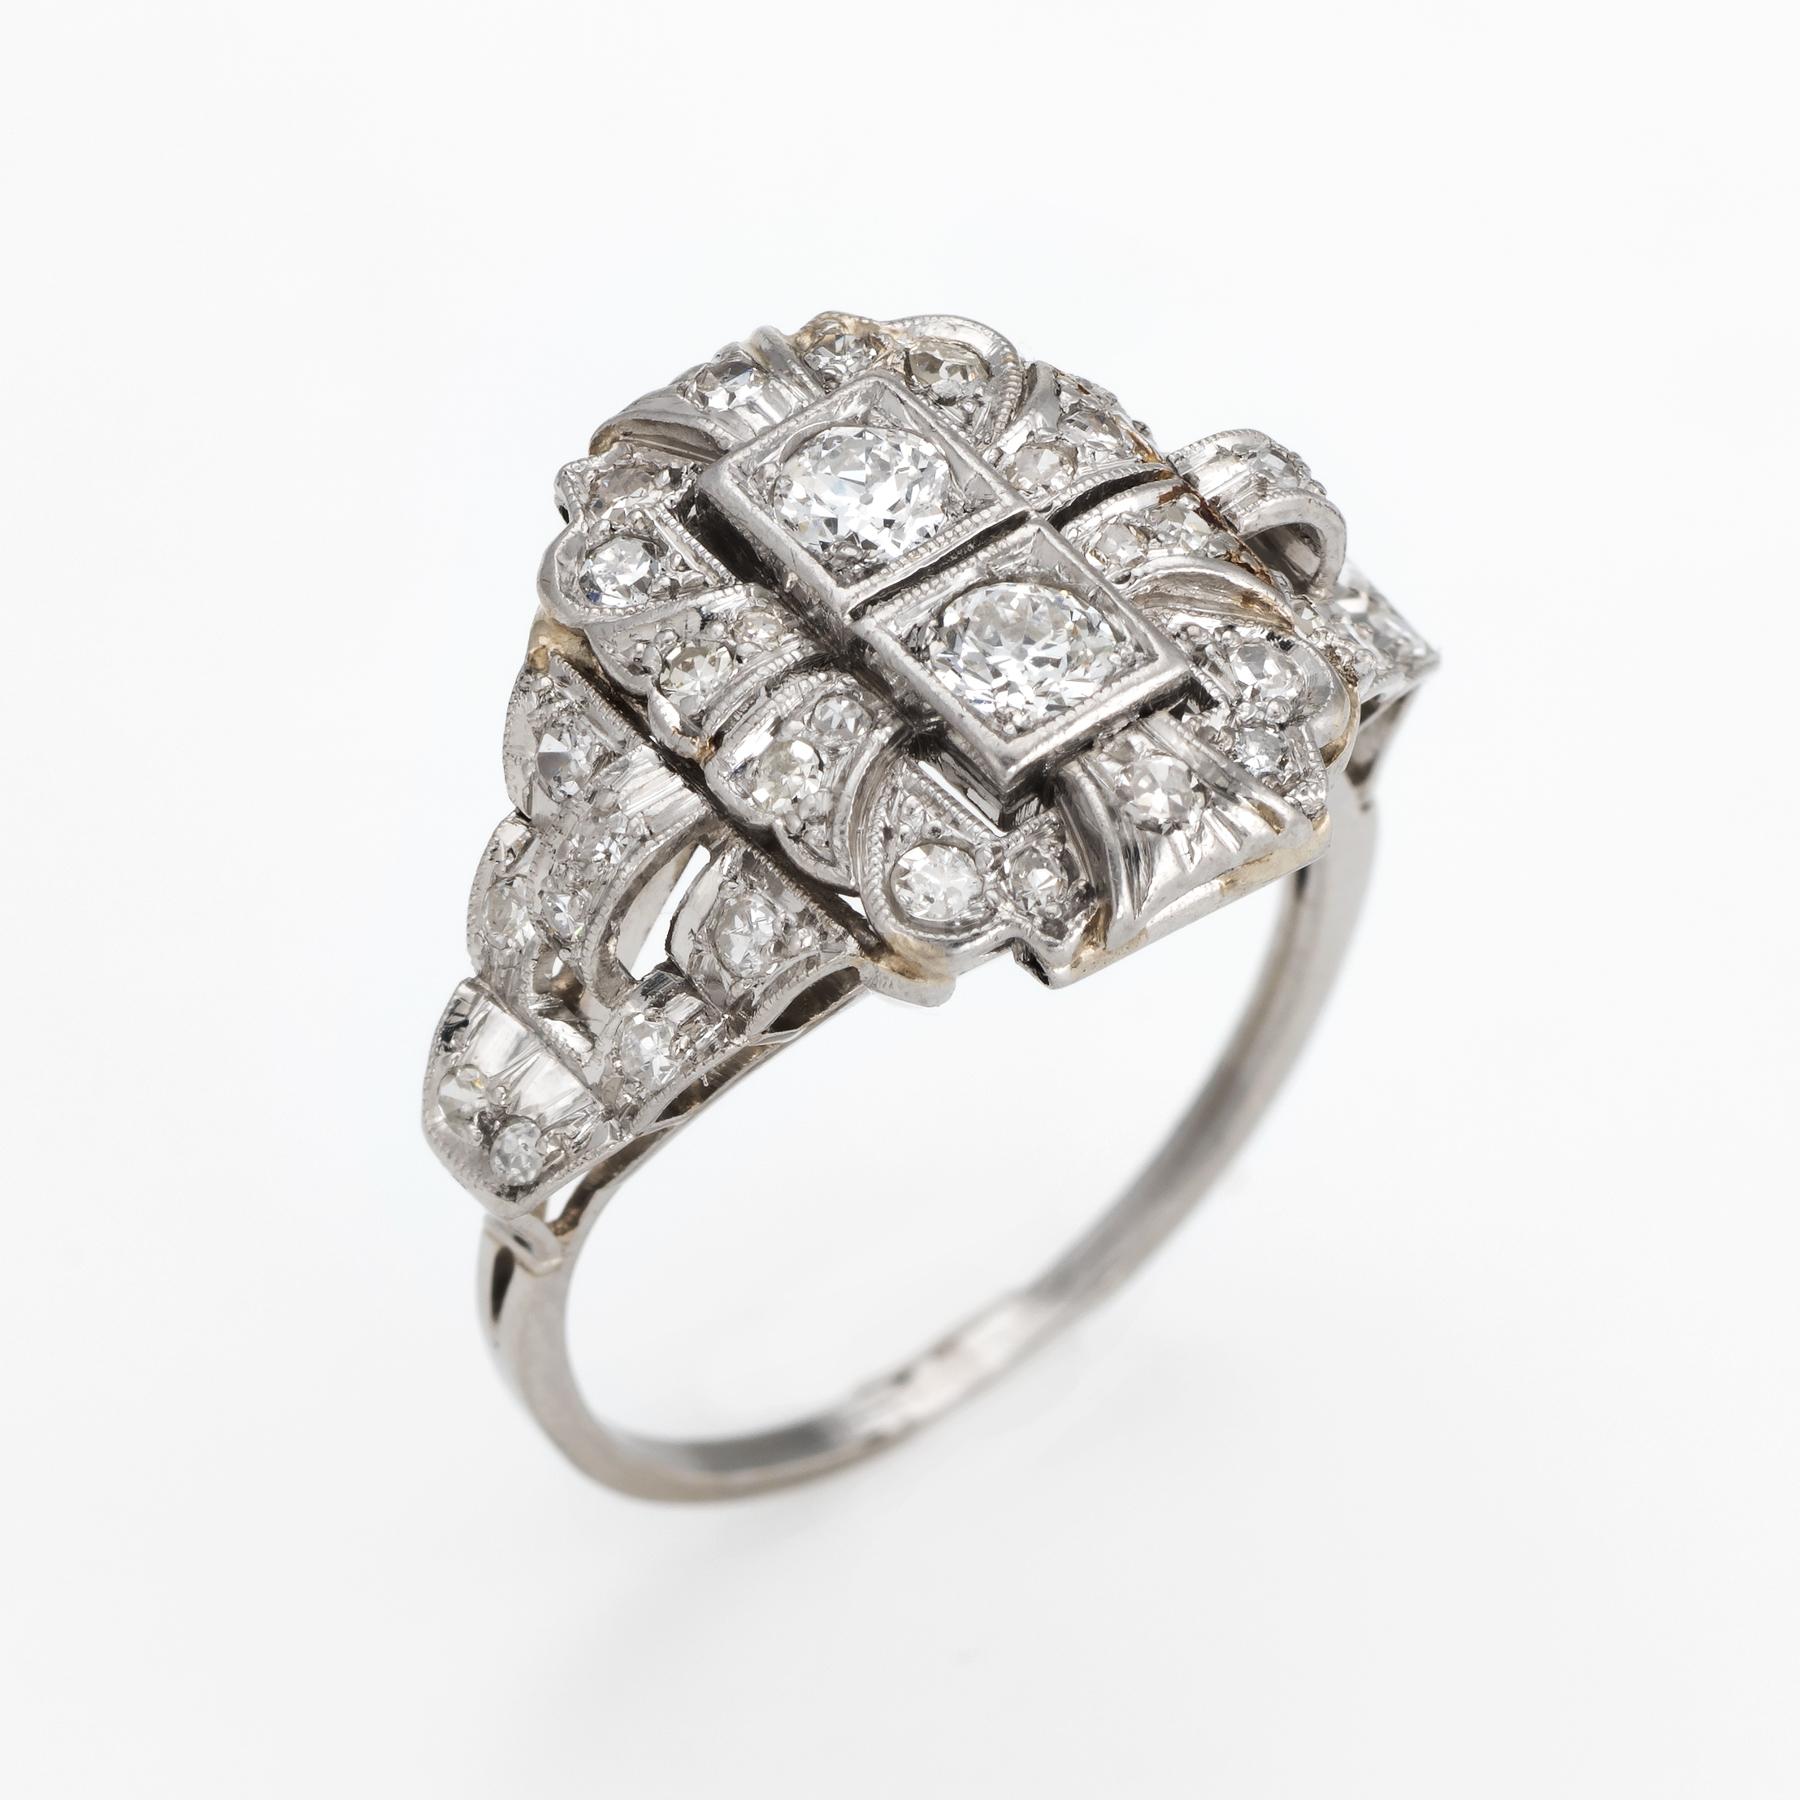 Elegant & finely detailed Art Deco era ring (circa 1920s to 1930s), crafted in 900 platinum. 

Two centrally mounted estimated 0.20 carat (each) Old European cut diamonds are accented with an estimated 0.34 carats of single cut diamonds. The total